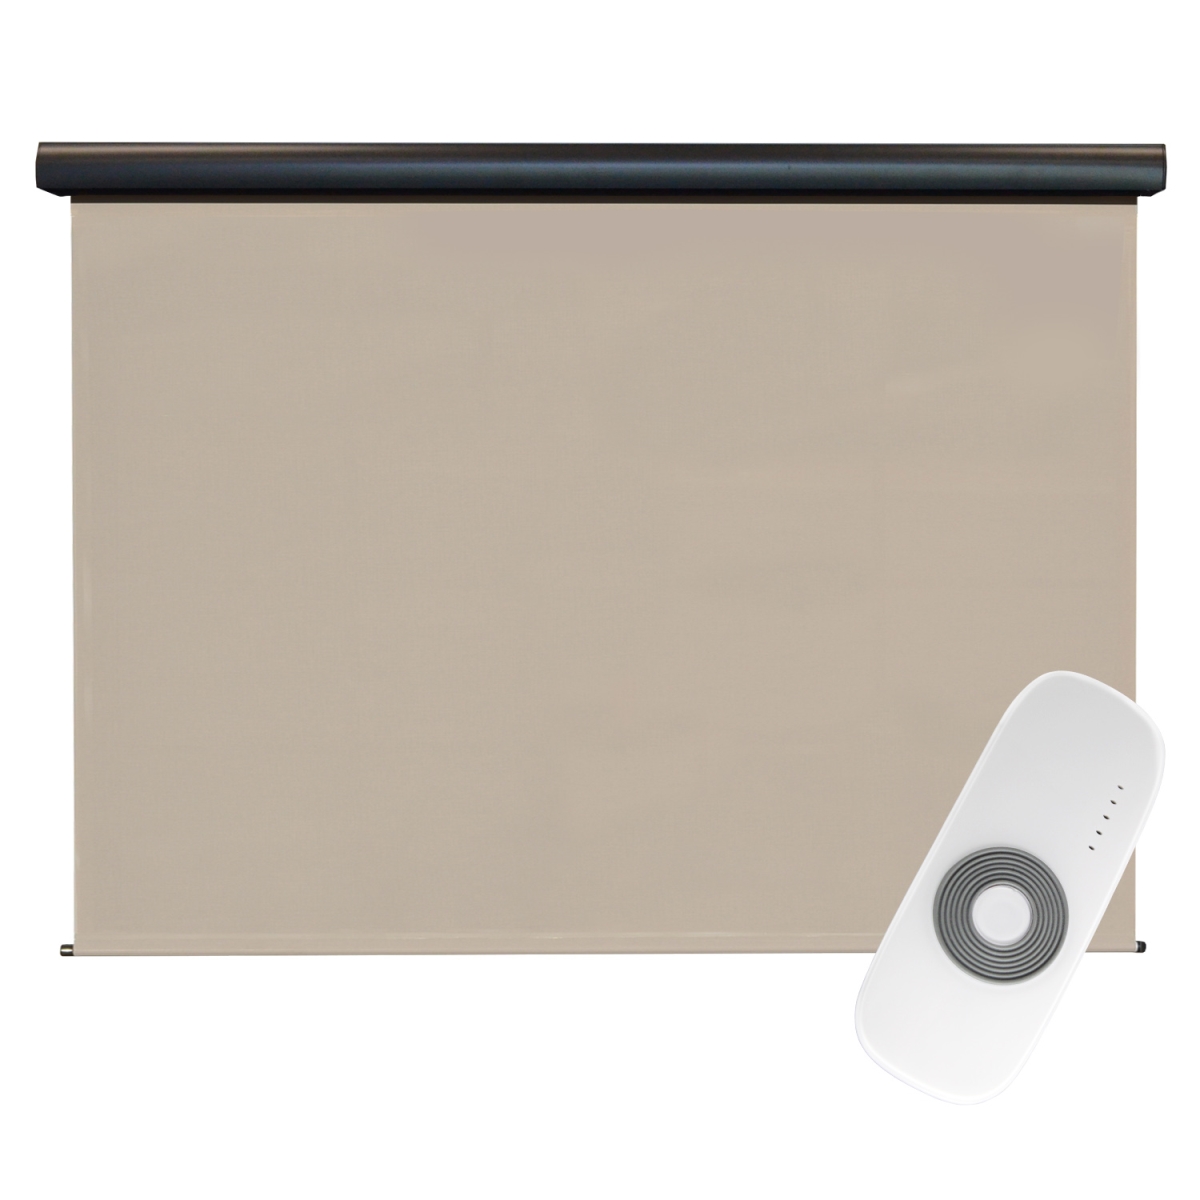 O80.88.80 8 X 8 Ft. Regal Rechargeable Motorized Outdoor Sun Shade With Protective Valance - Maple White